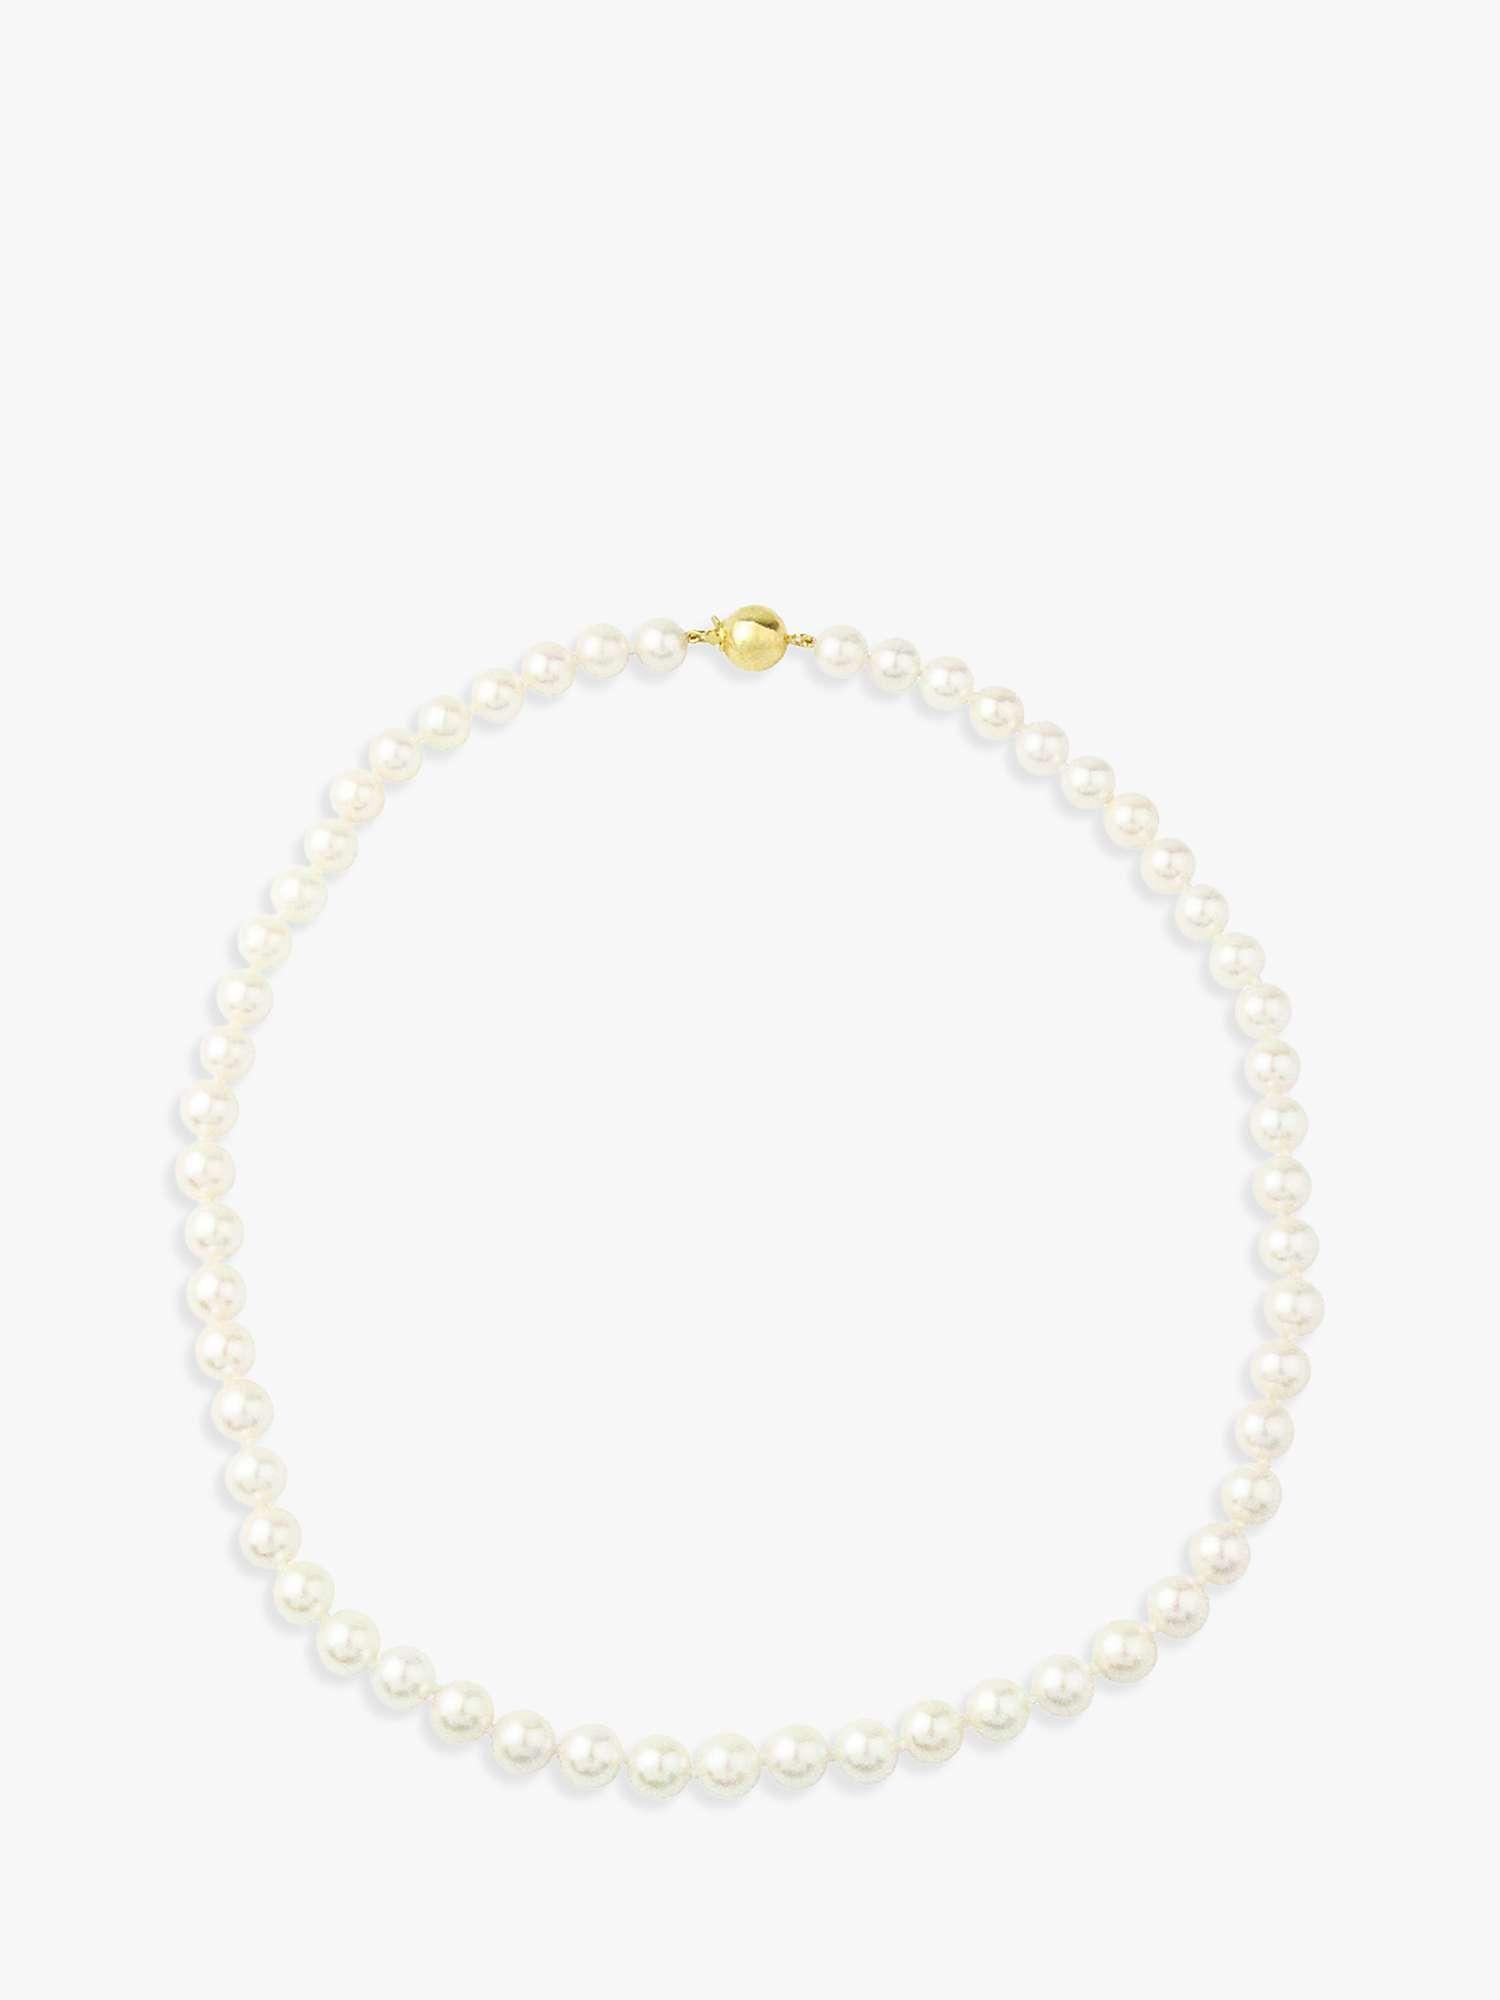 Buy A B Davis Akoya Cultured Pearl Necklace, White/Gold Online at johnlewis.com